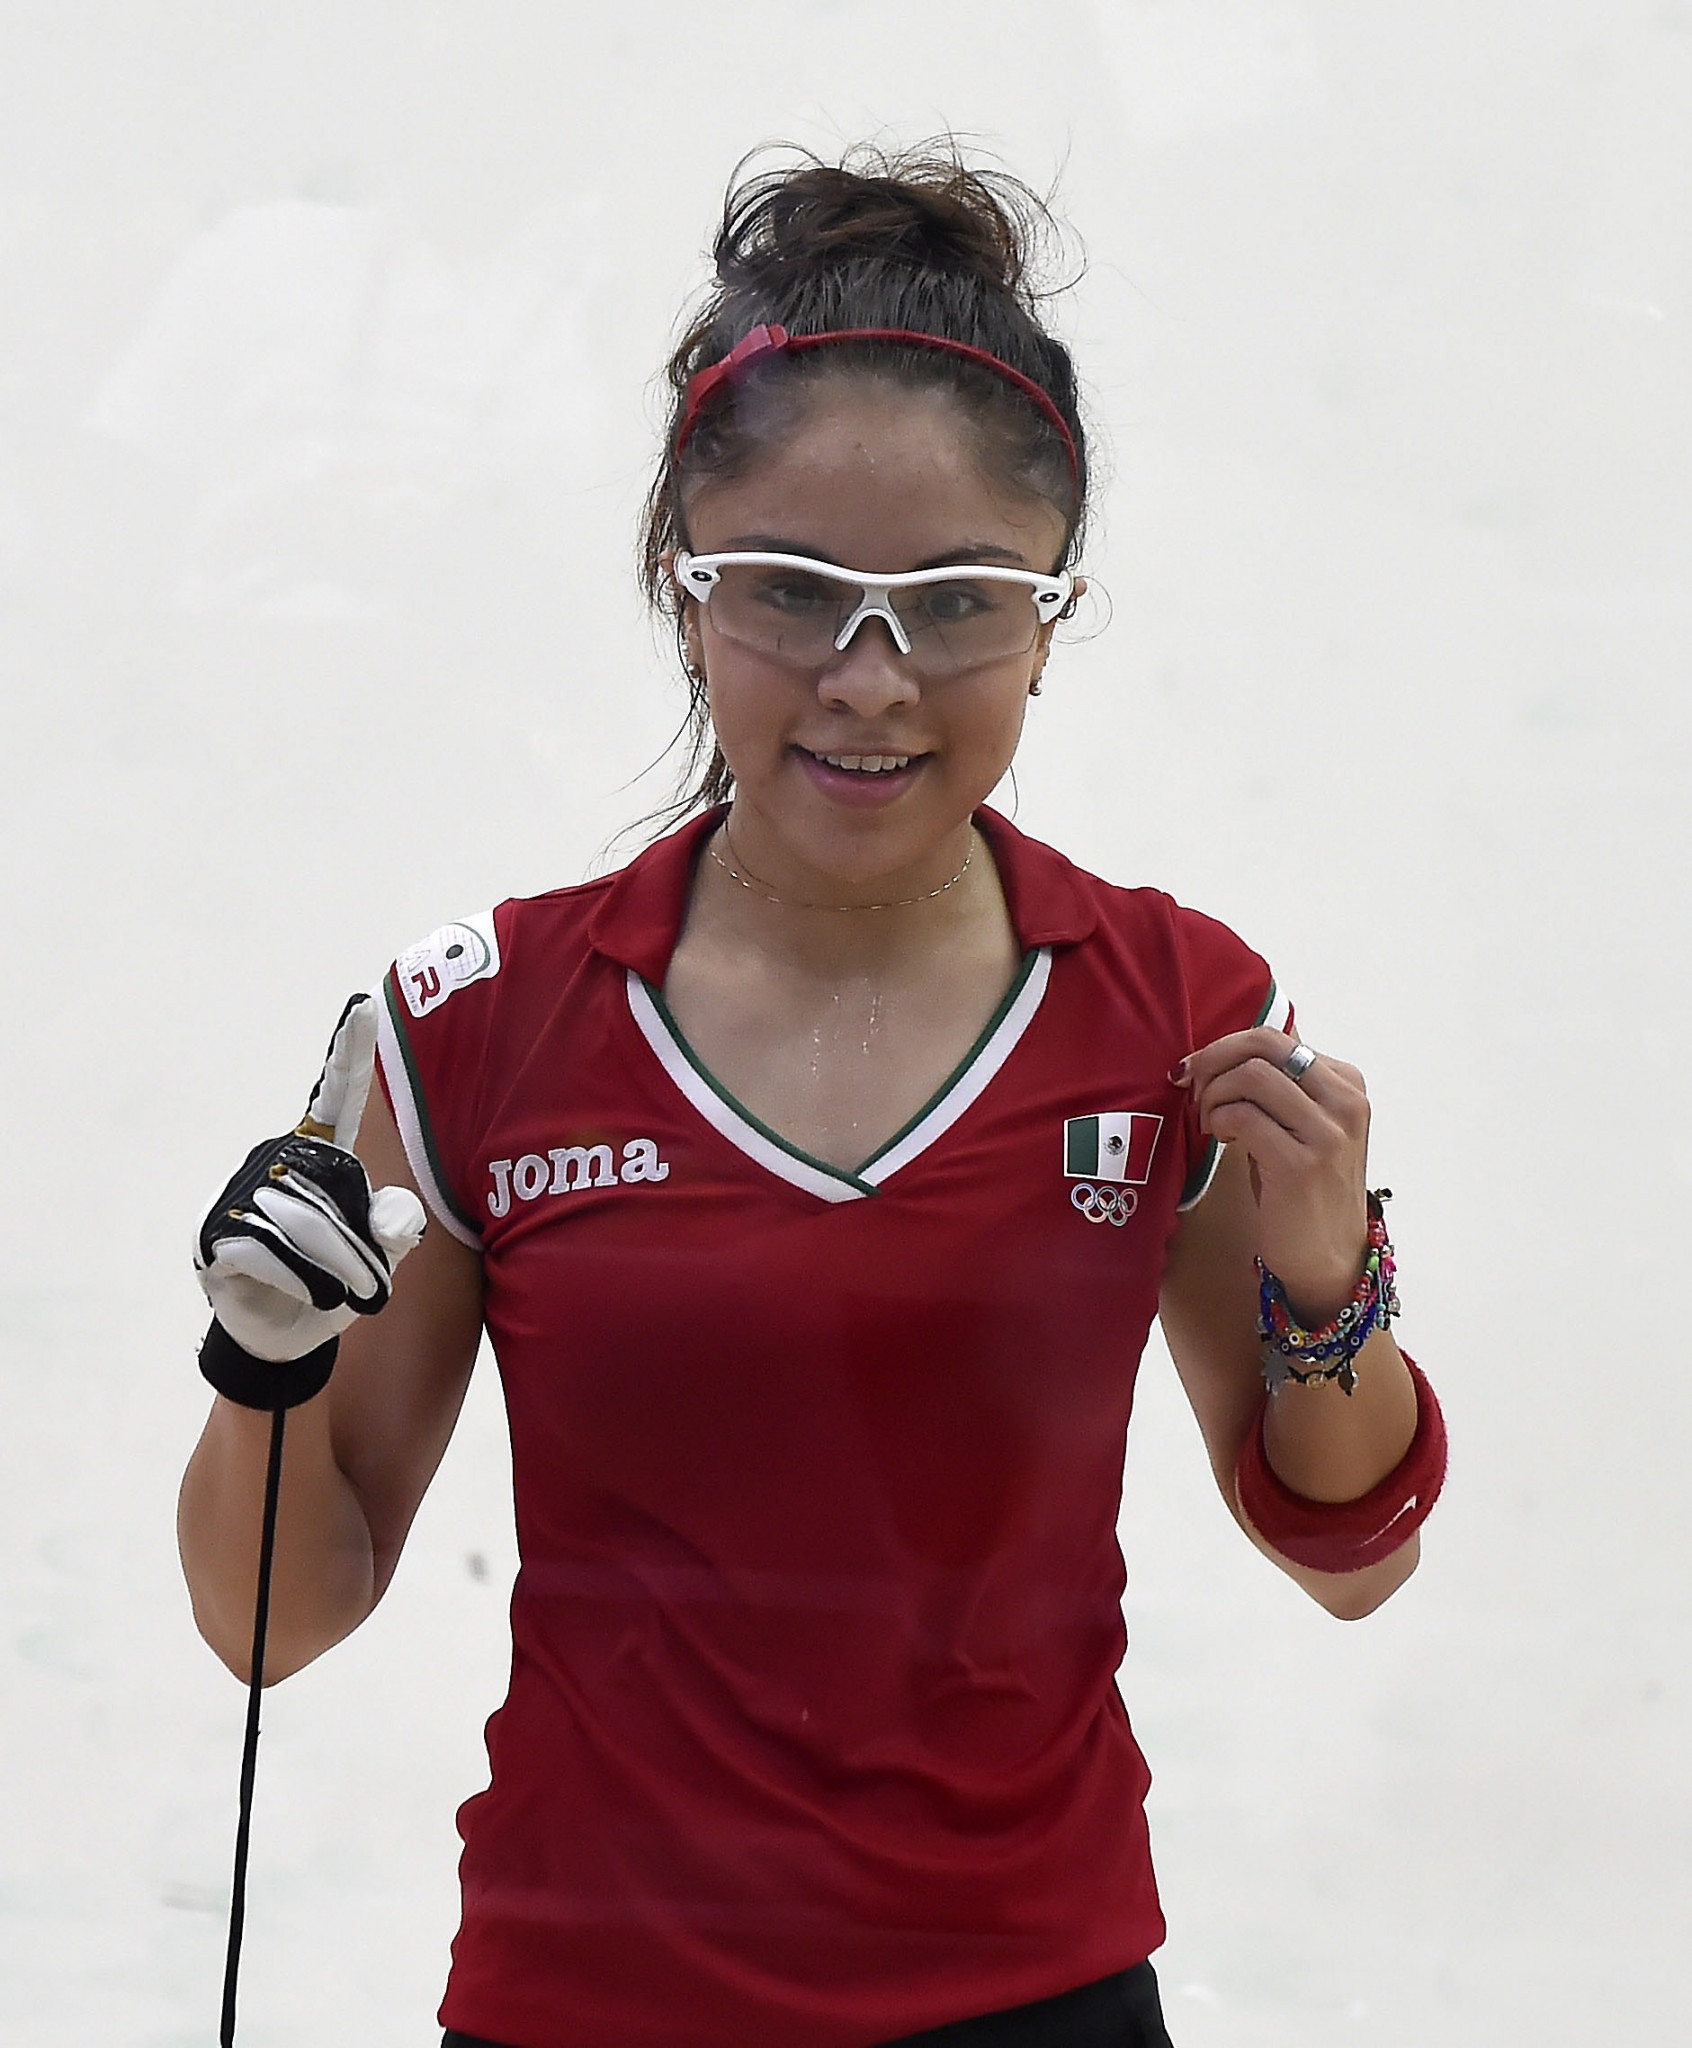 Top seeds Horn and Longoria reach semi-finals at Racquetball World Championships in San Jose